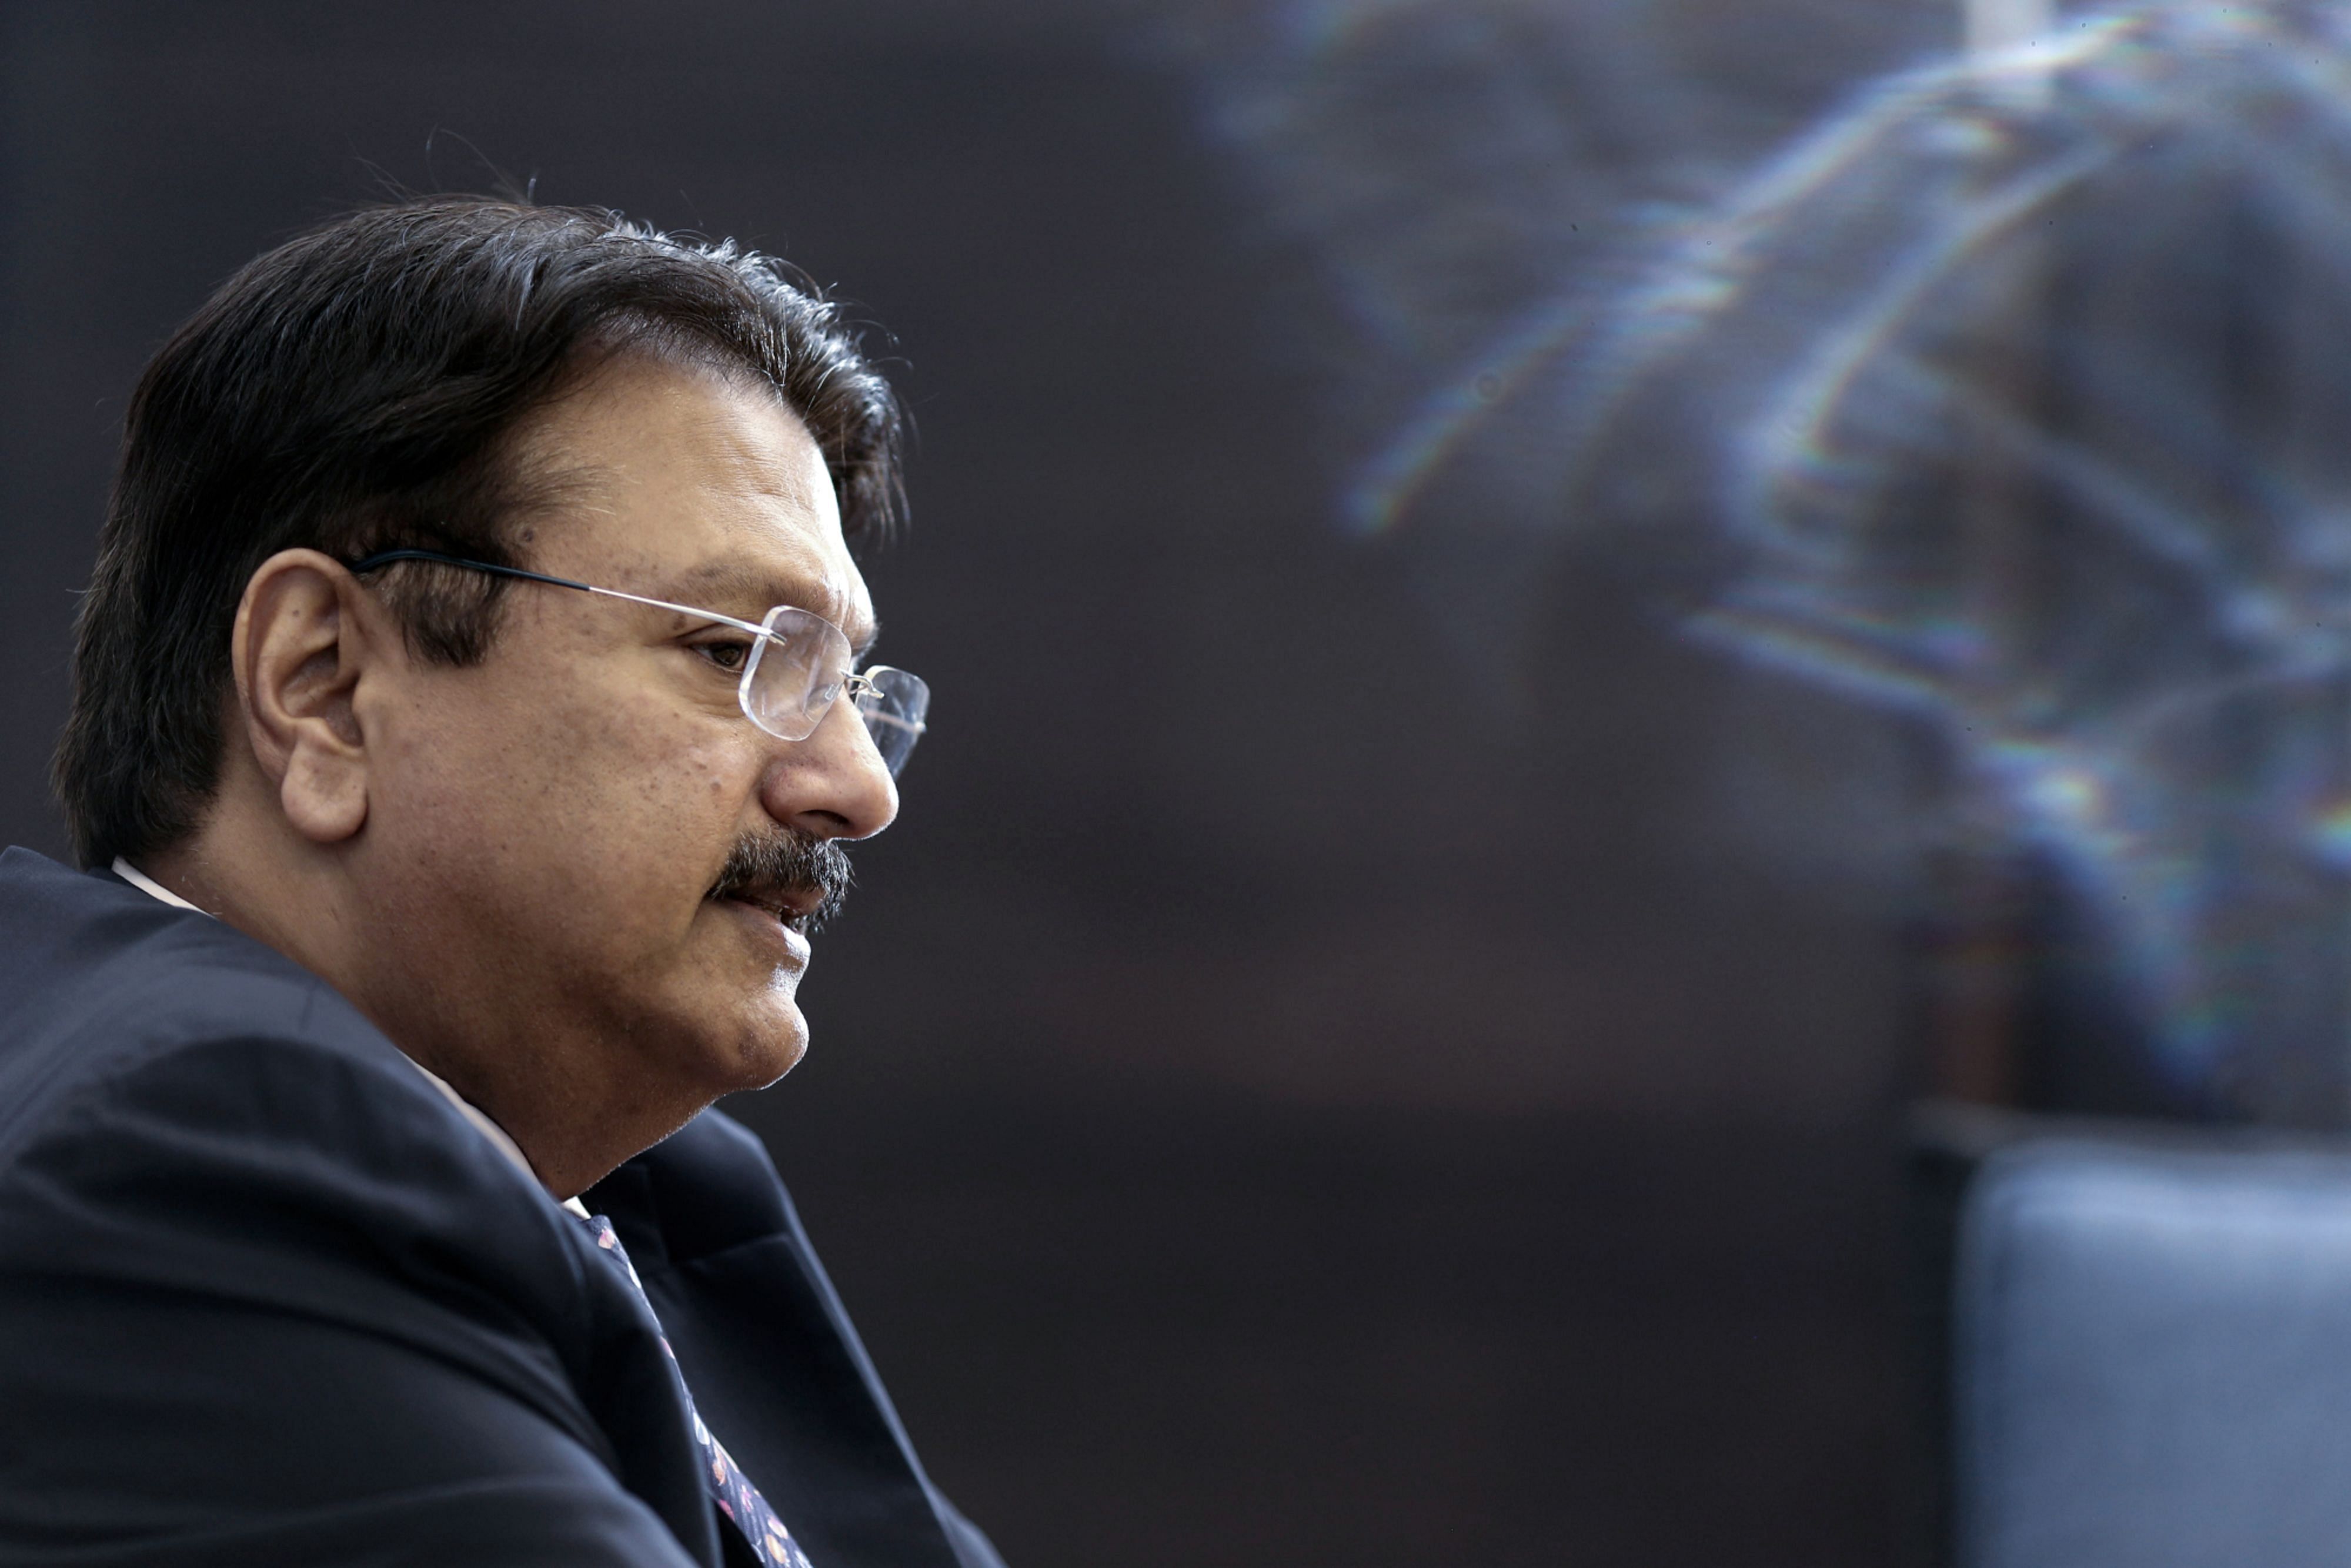 Indian businessman Ajay Piramal is looking to bring in investors alongside its real estate-focused shadow bank unit to help complete projects. Credit: Bloomberg photo